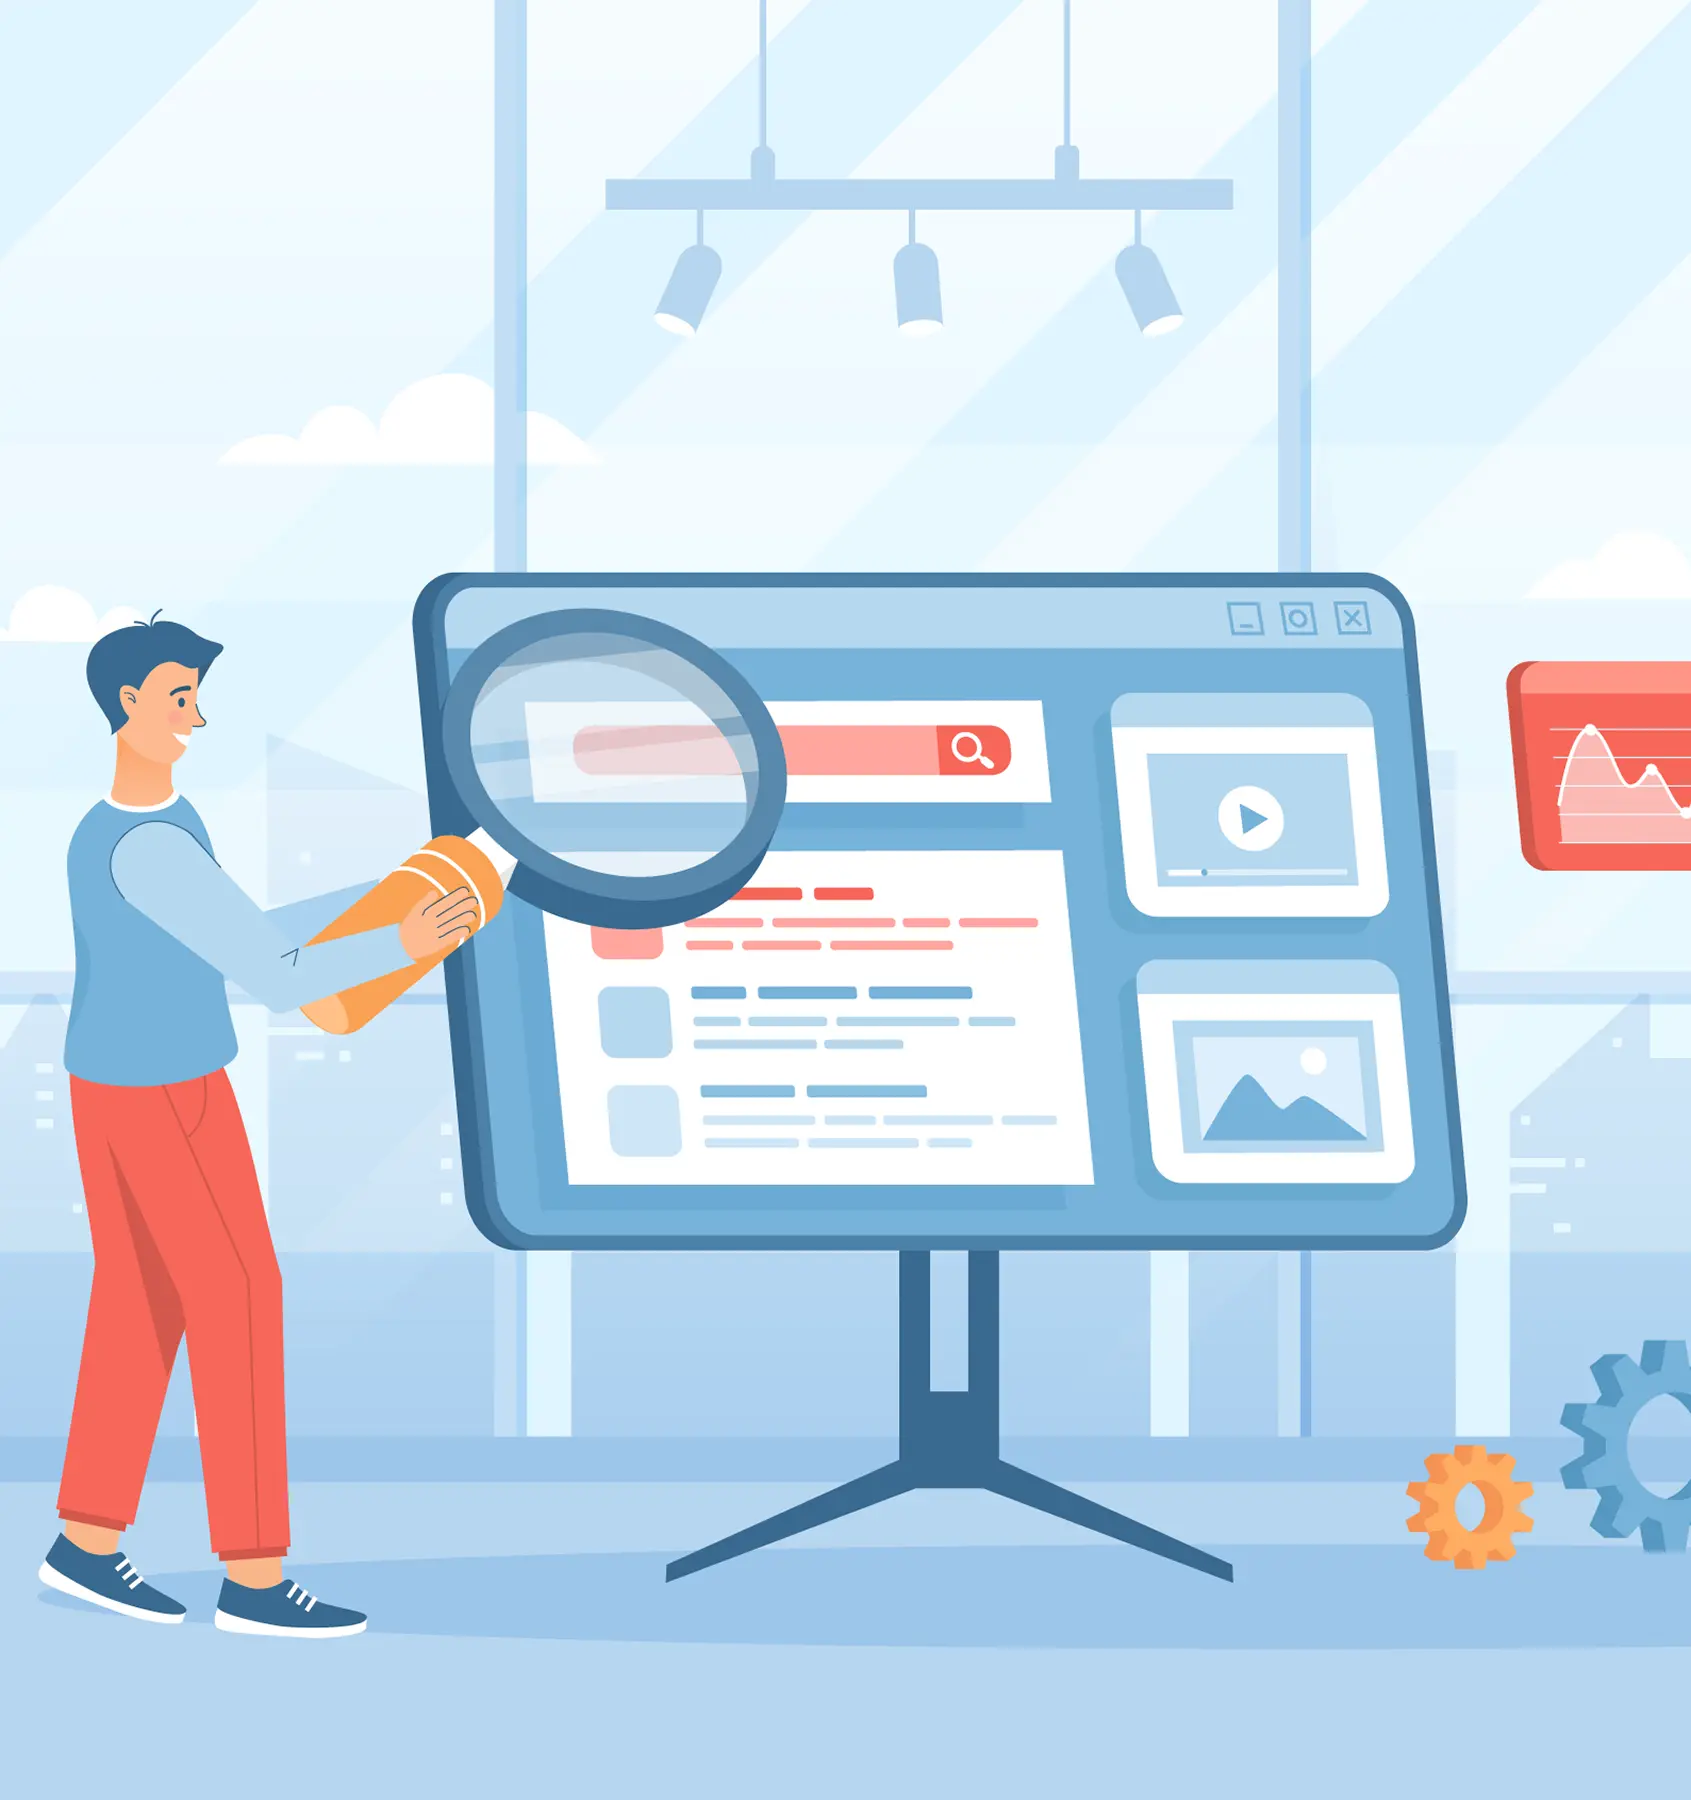 How Can You Determine if Your Website Requires an UX Audit?